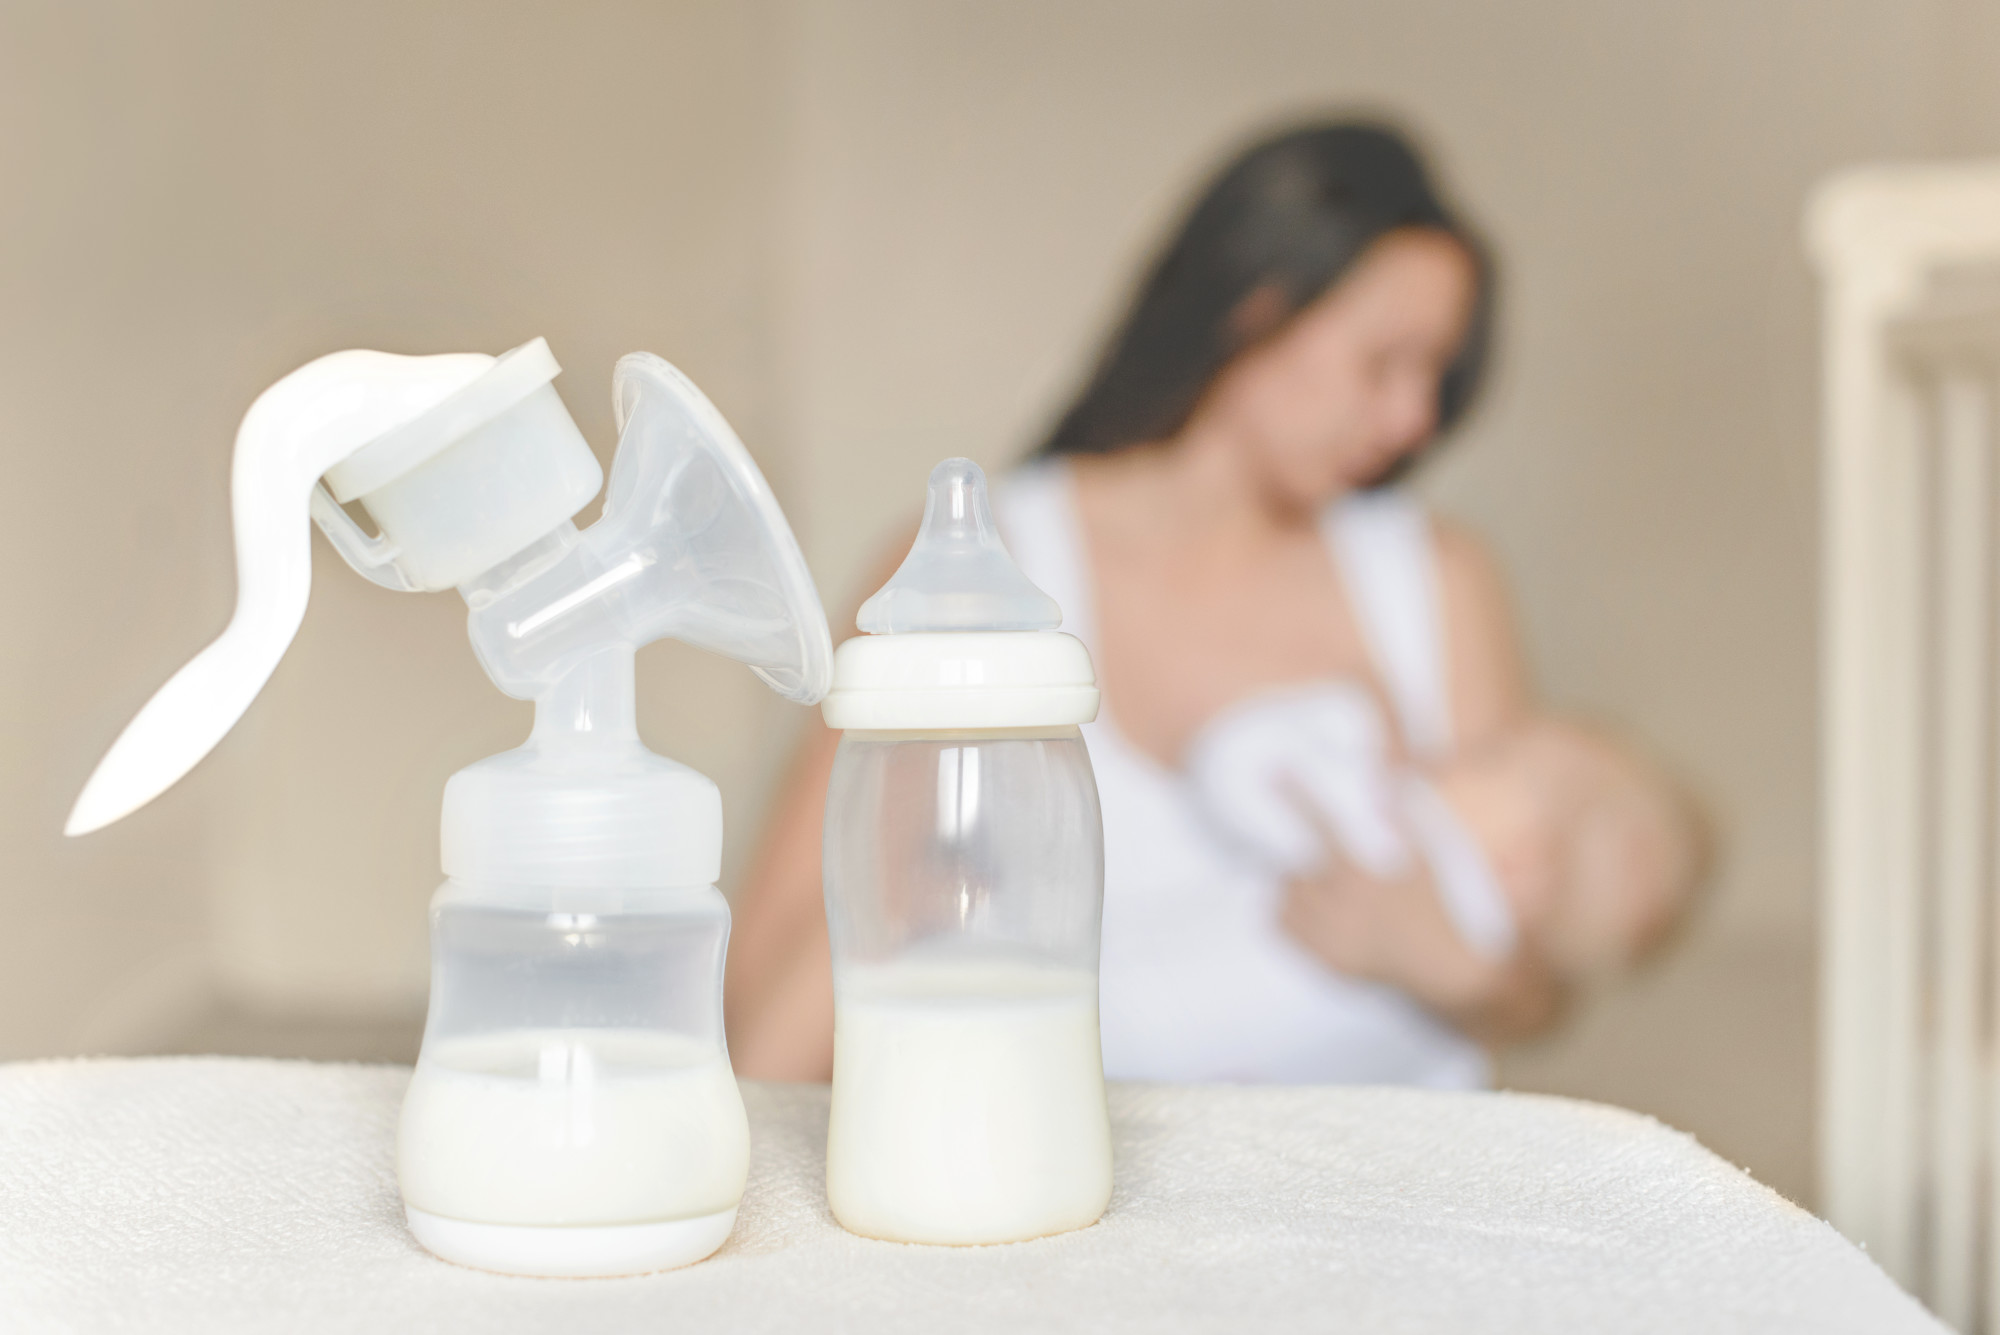 Would you like to know how to produce more breast milk when pumping? Read on to learn what you need to know on the subject.